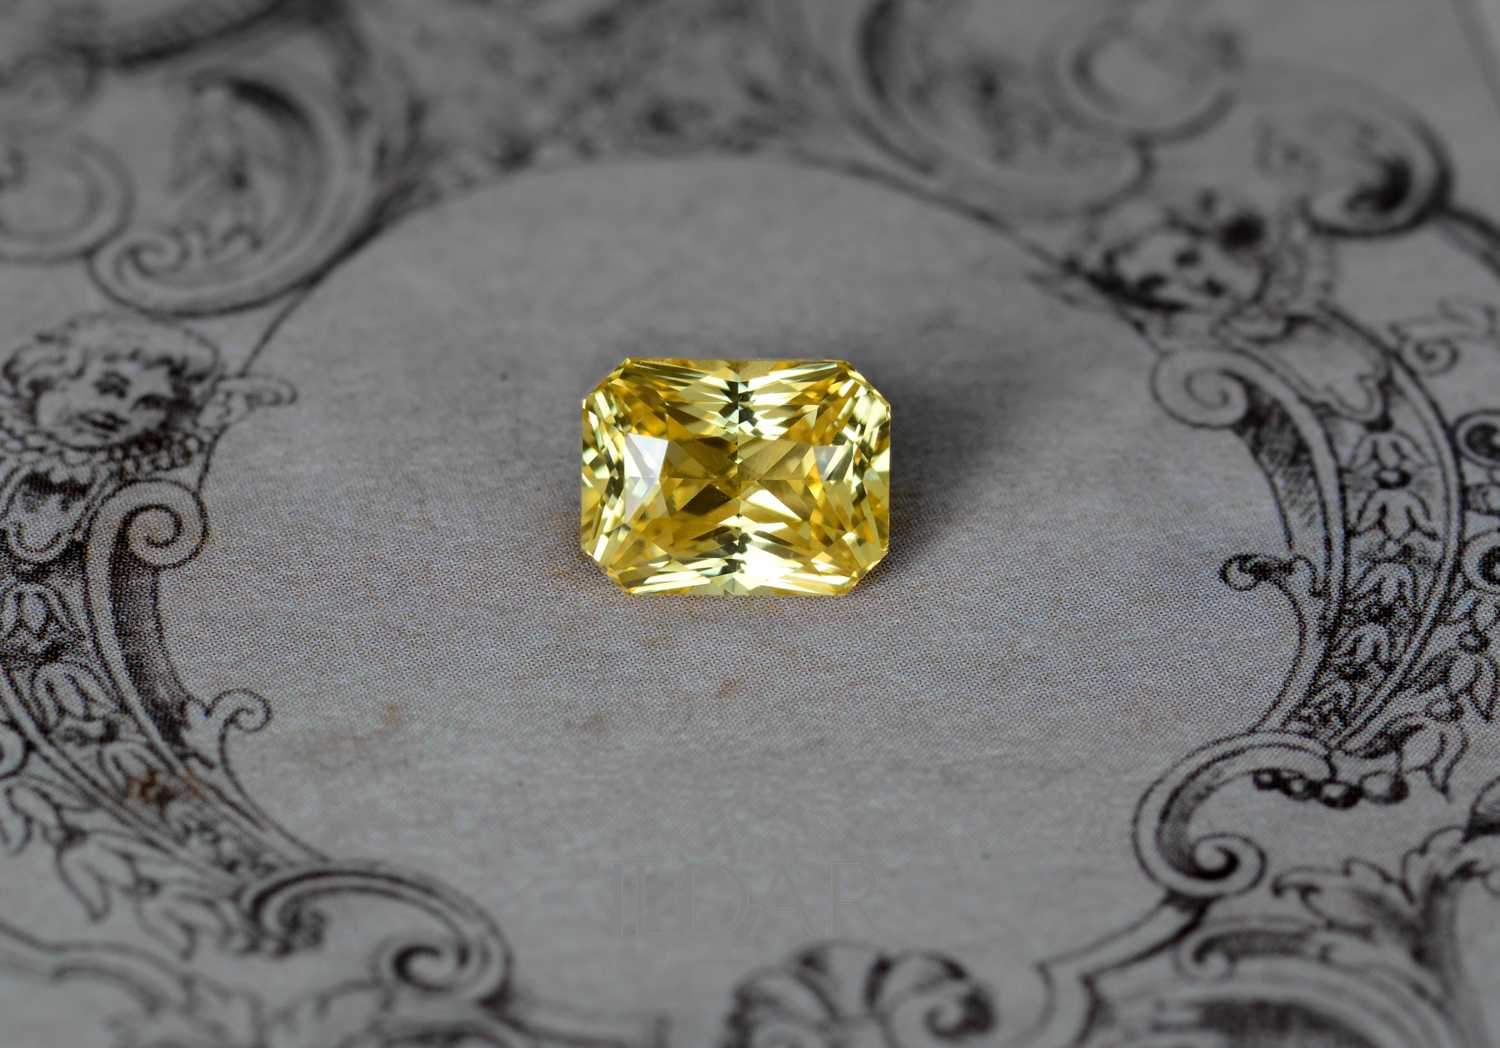 Precious natural yellow sapphire without treatment 4.14 ct order